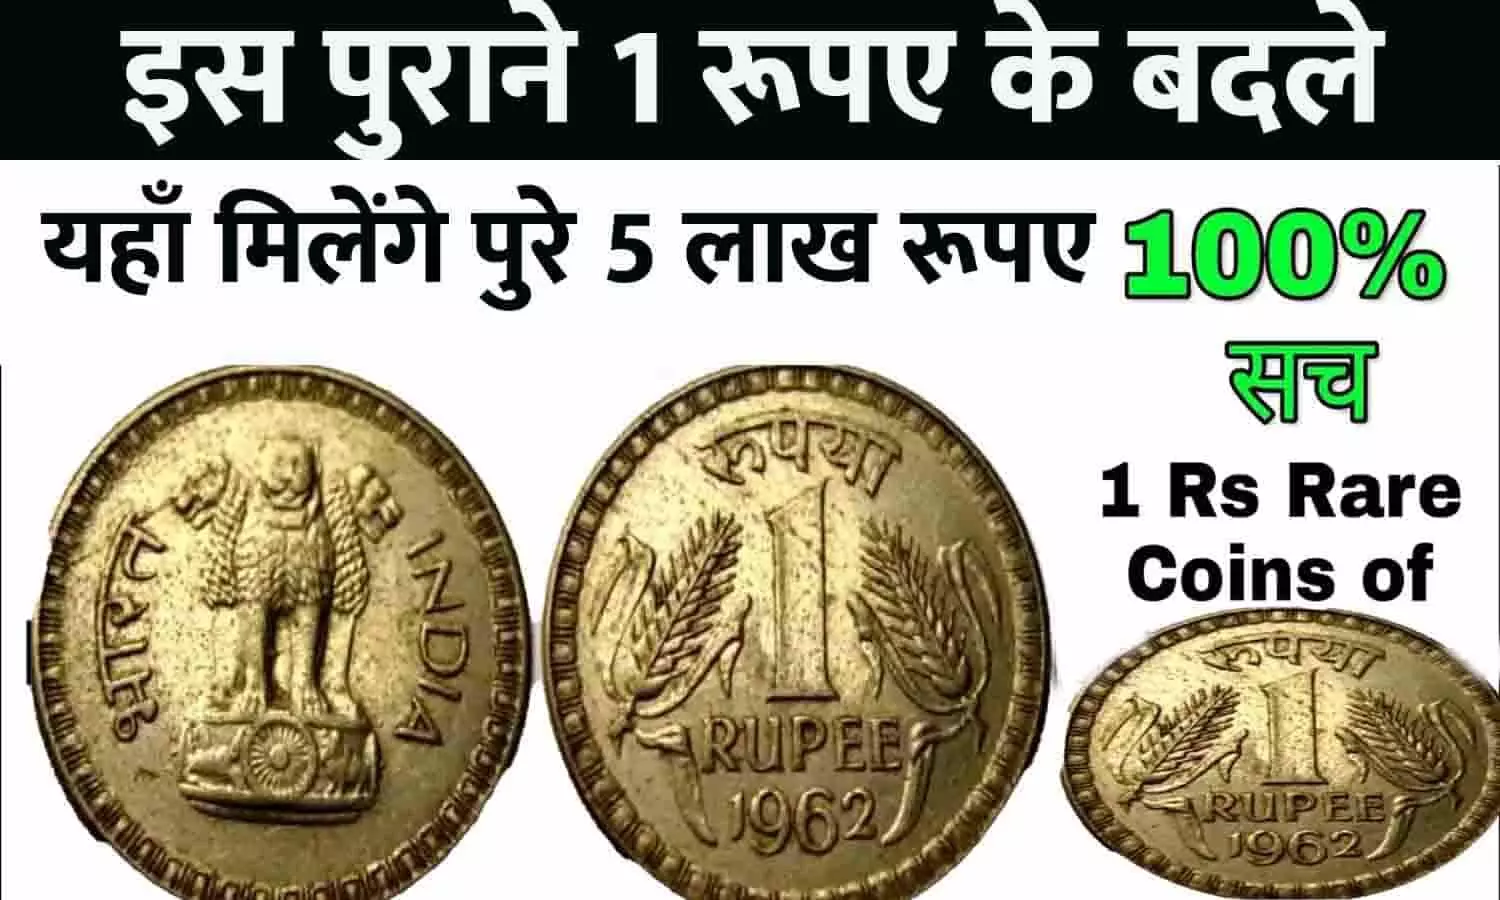 Old 1 Rupee Coin Sell Online